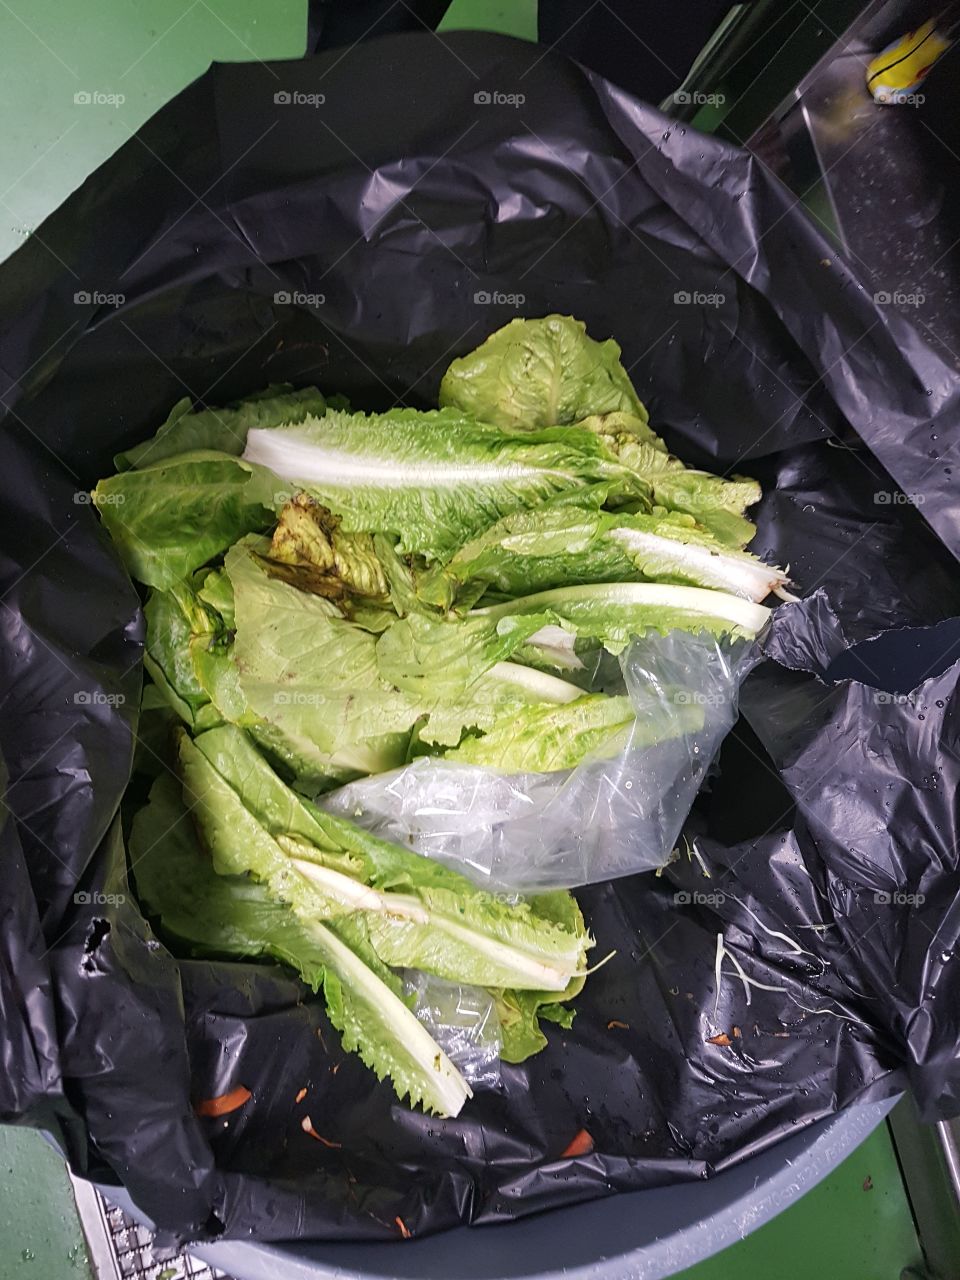 Food waste, throwing fresh salad into the garbage